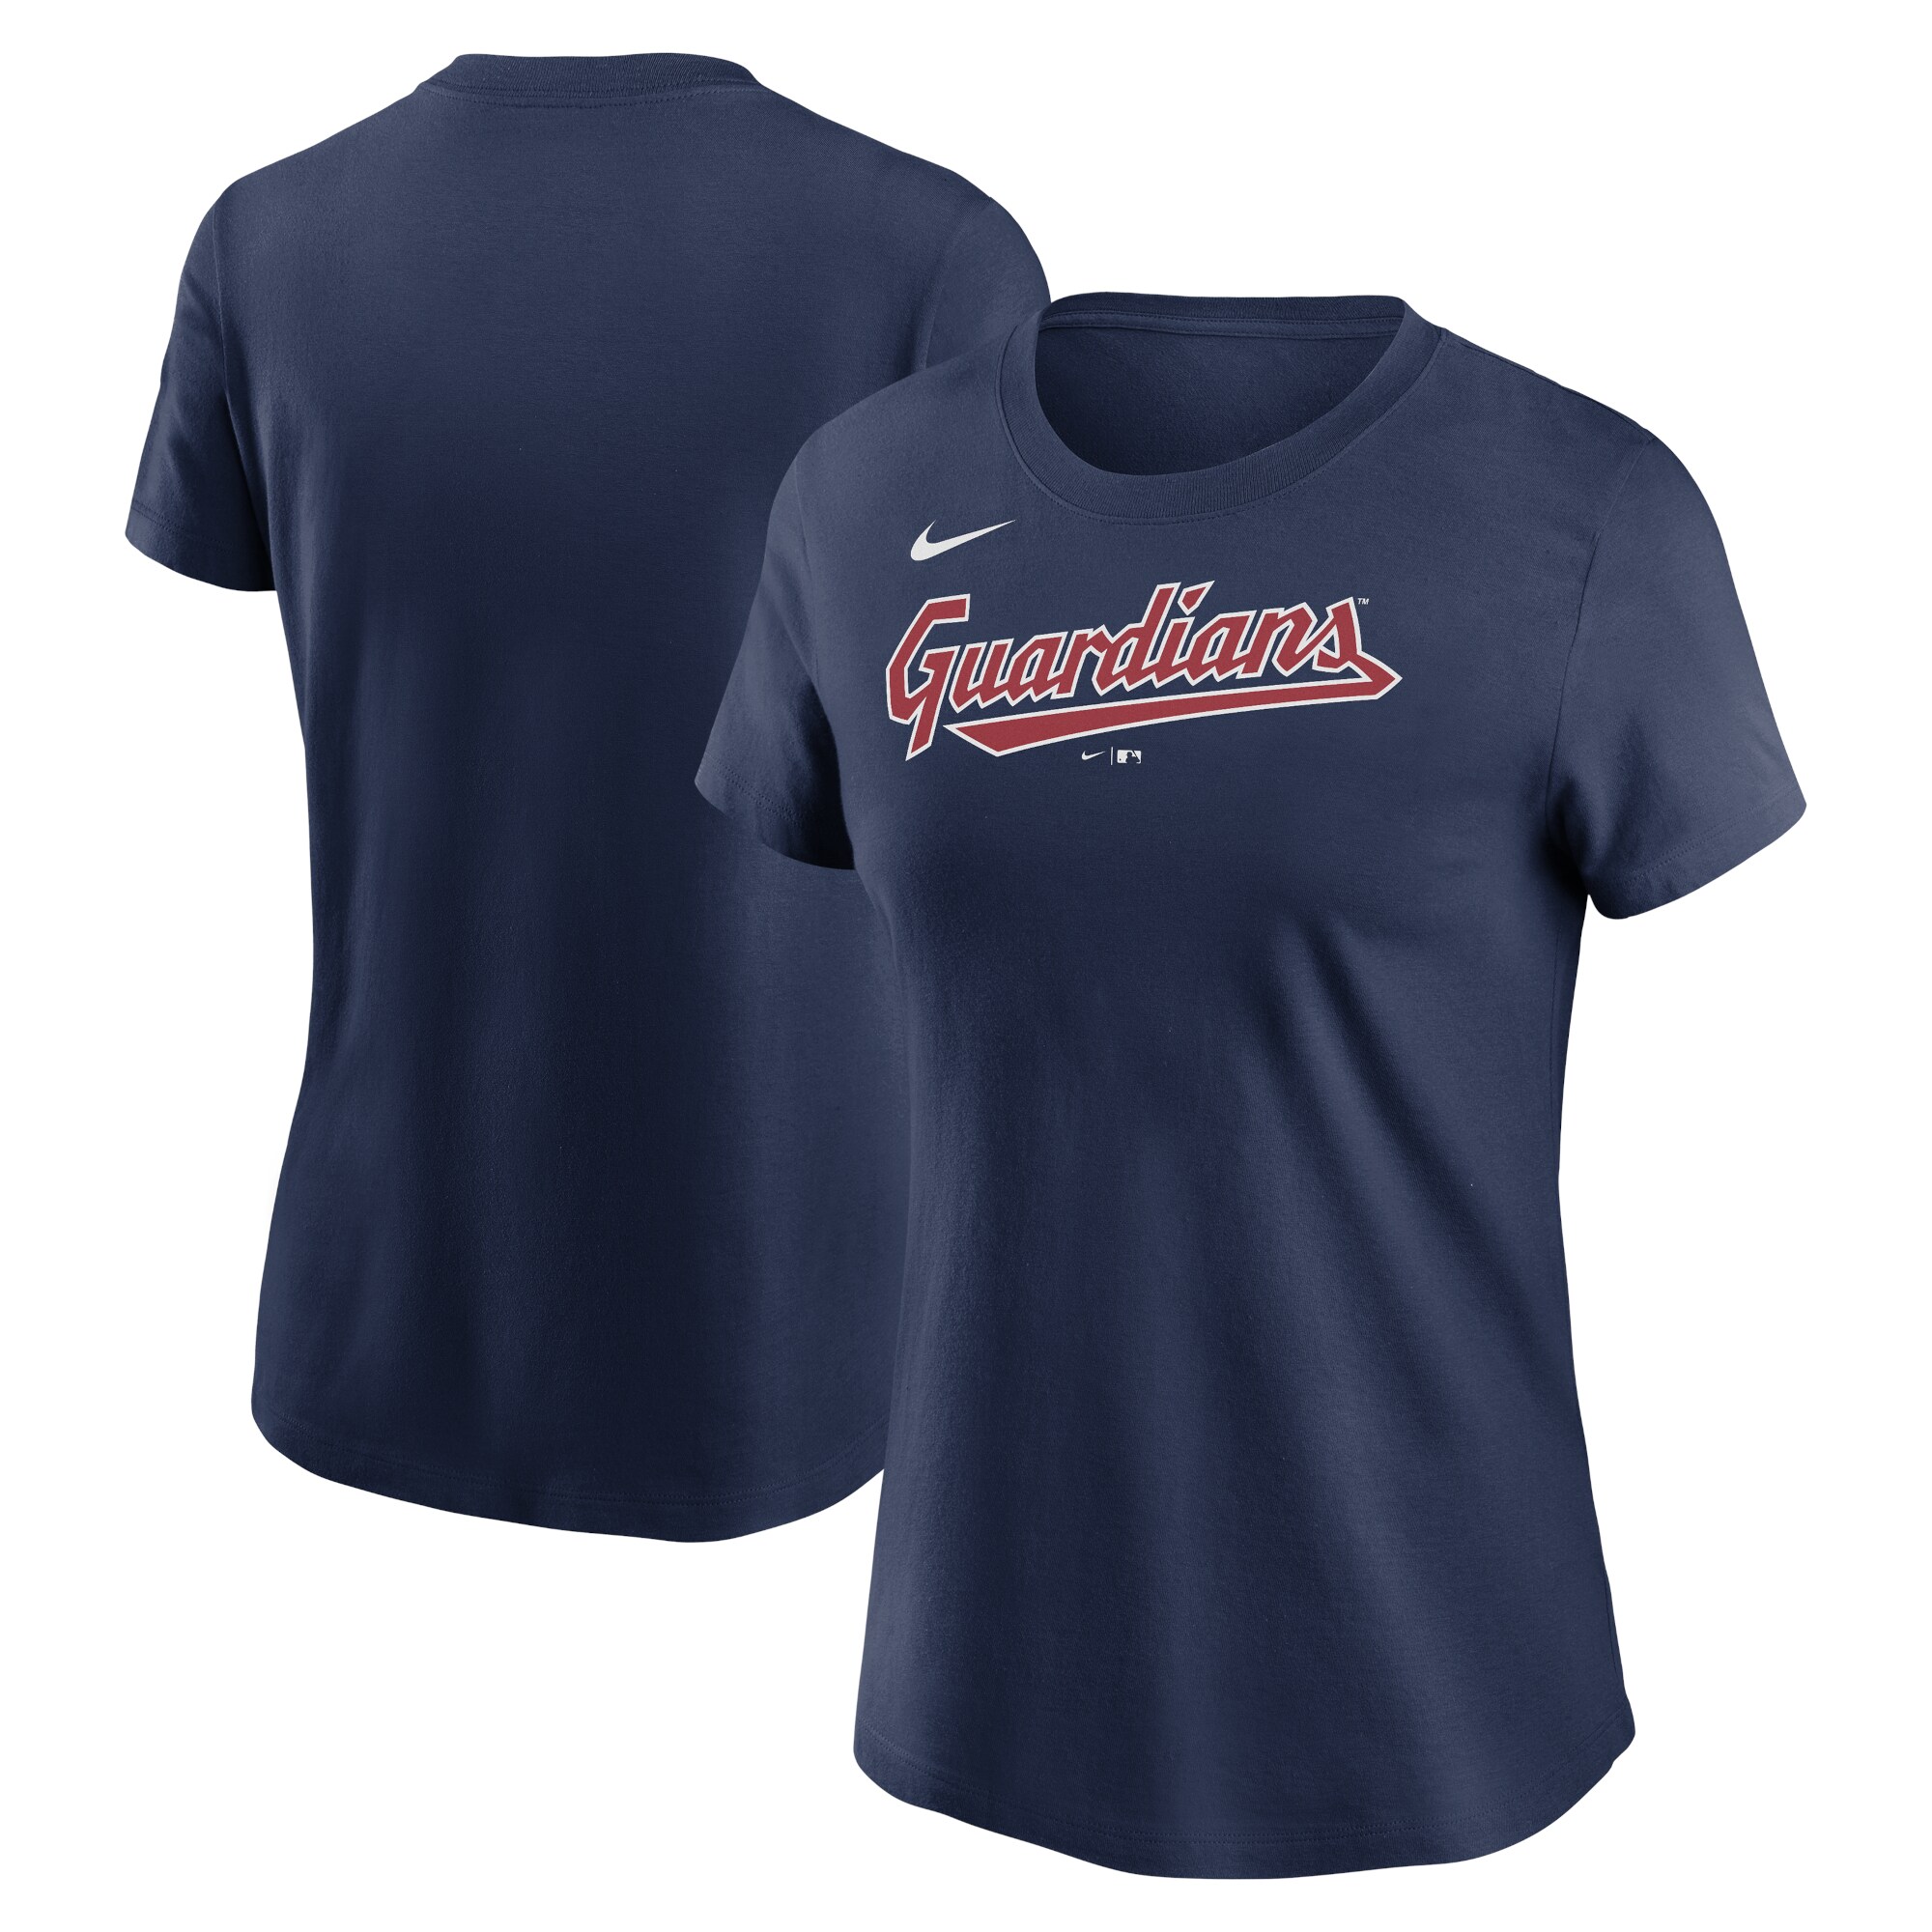 Cleveland Guardians merchandise is now available online on Fanatics 